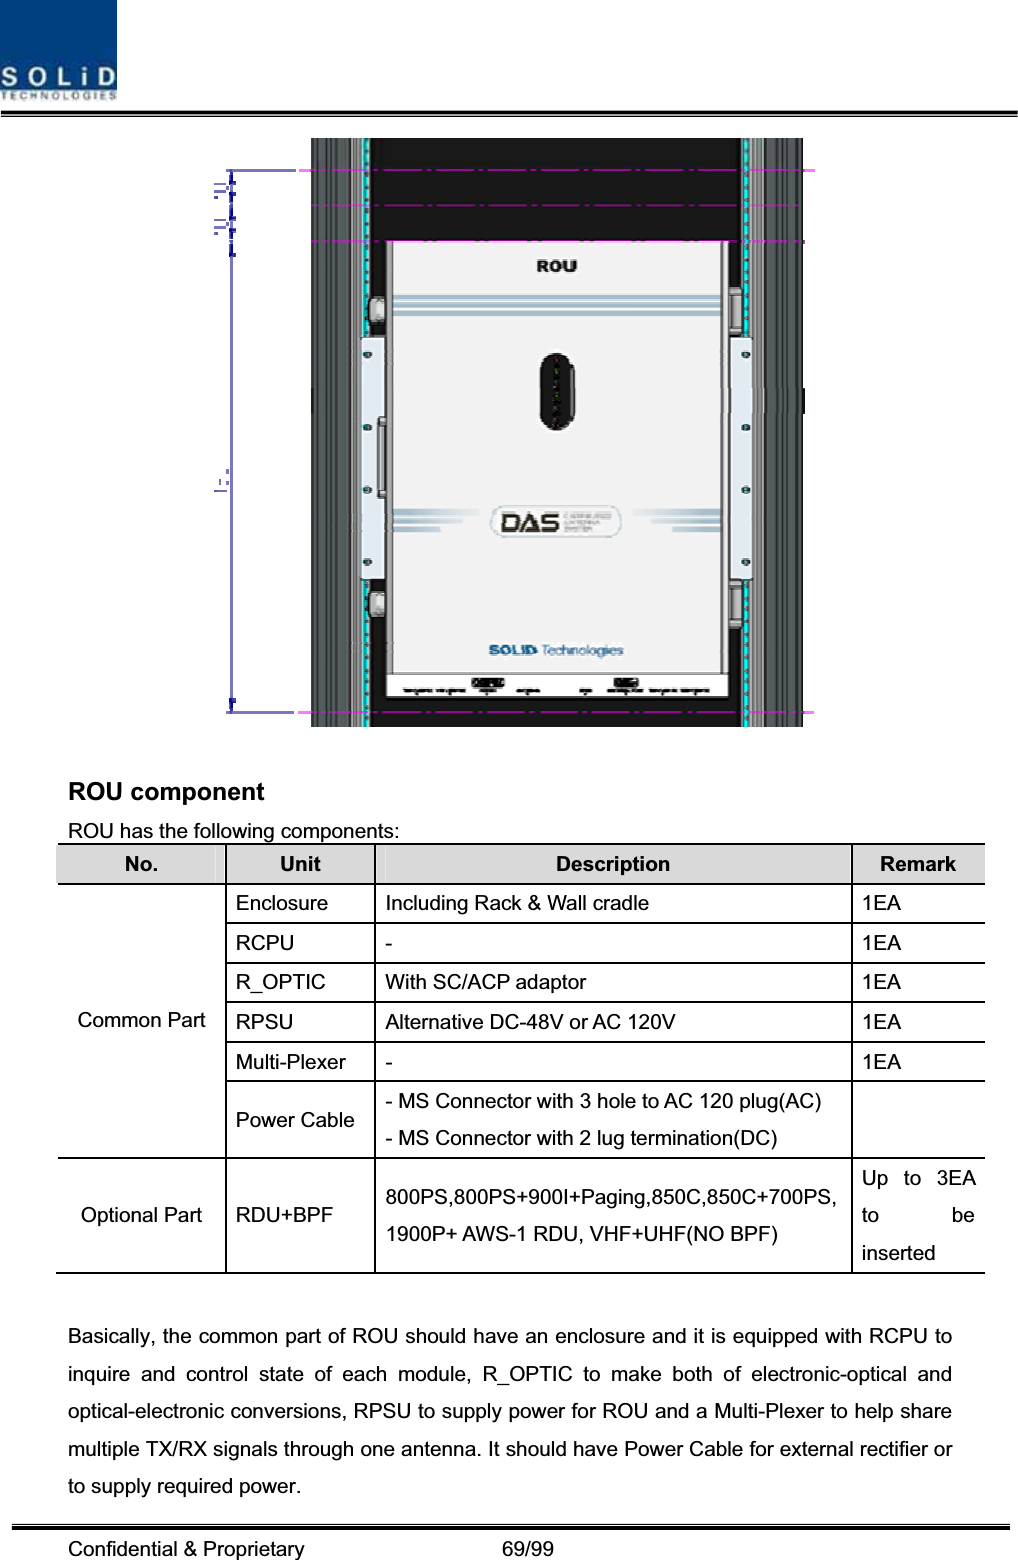 Confidential &amp; Proprietary                   69/99 ROU componentROU has the following components: No. Unit Description  Remark Enclosure  Including Rack &amp; Wall cradle  1EA RCPU -  1EA R_OPTIC  With SC/ACP adaptor 1EARPSU  Alternative DC-48V or AC 120V    1EA Multi-Plexer -  1EA Common Part Power Cable  - MS Connector with 3 hole to AC 120 plug(AC) - MS Connector with 2 lug termination(DC) Optional Part  RDU+BPF  800PS,800PS+900I+Paging,850C,850C+700PS, 1900P+ AWS-1 RDU, VHF+UHF(NO BPF) Up to 3EA to be inserted Basically, the common part of ROU should have an enclosure and it is equipped with RCPU to inquire and control state of each module, R_OPTIC to make both of electronic-optical and optical-electronic conversions, RPSU to supply power for ROU and a Multi-Plexer to help share multiple TX/RX signals through one antenna. It should have Power Cable for external rectifier or to supply required power. 